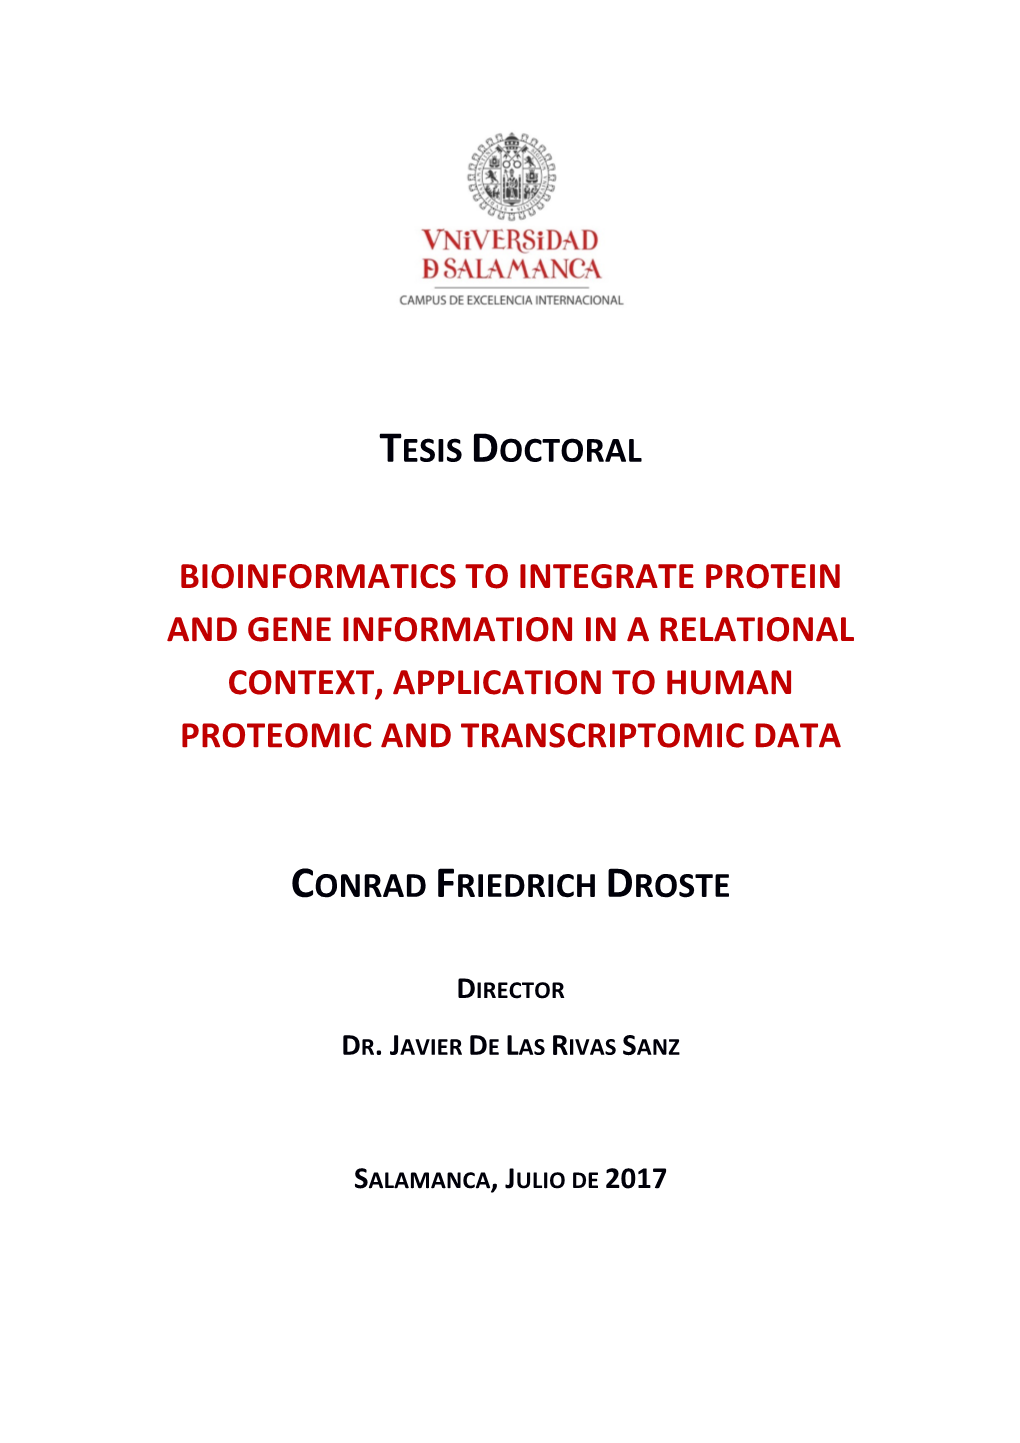 Bioinformatics to Integrate Protein and Gene Information in a Relational Context, Application to Human Proteomic and Transcriptomic Data